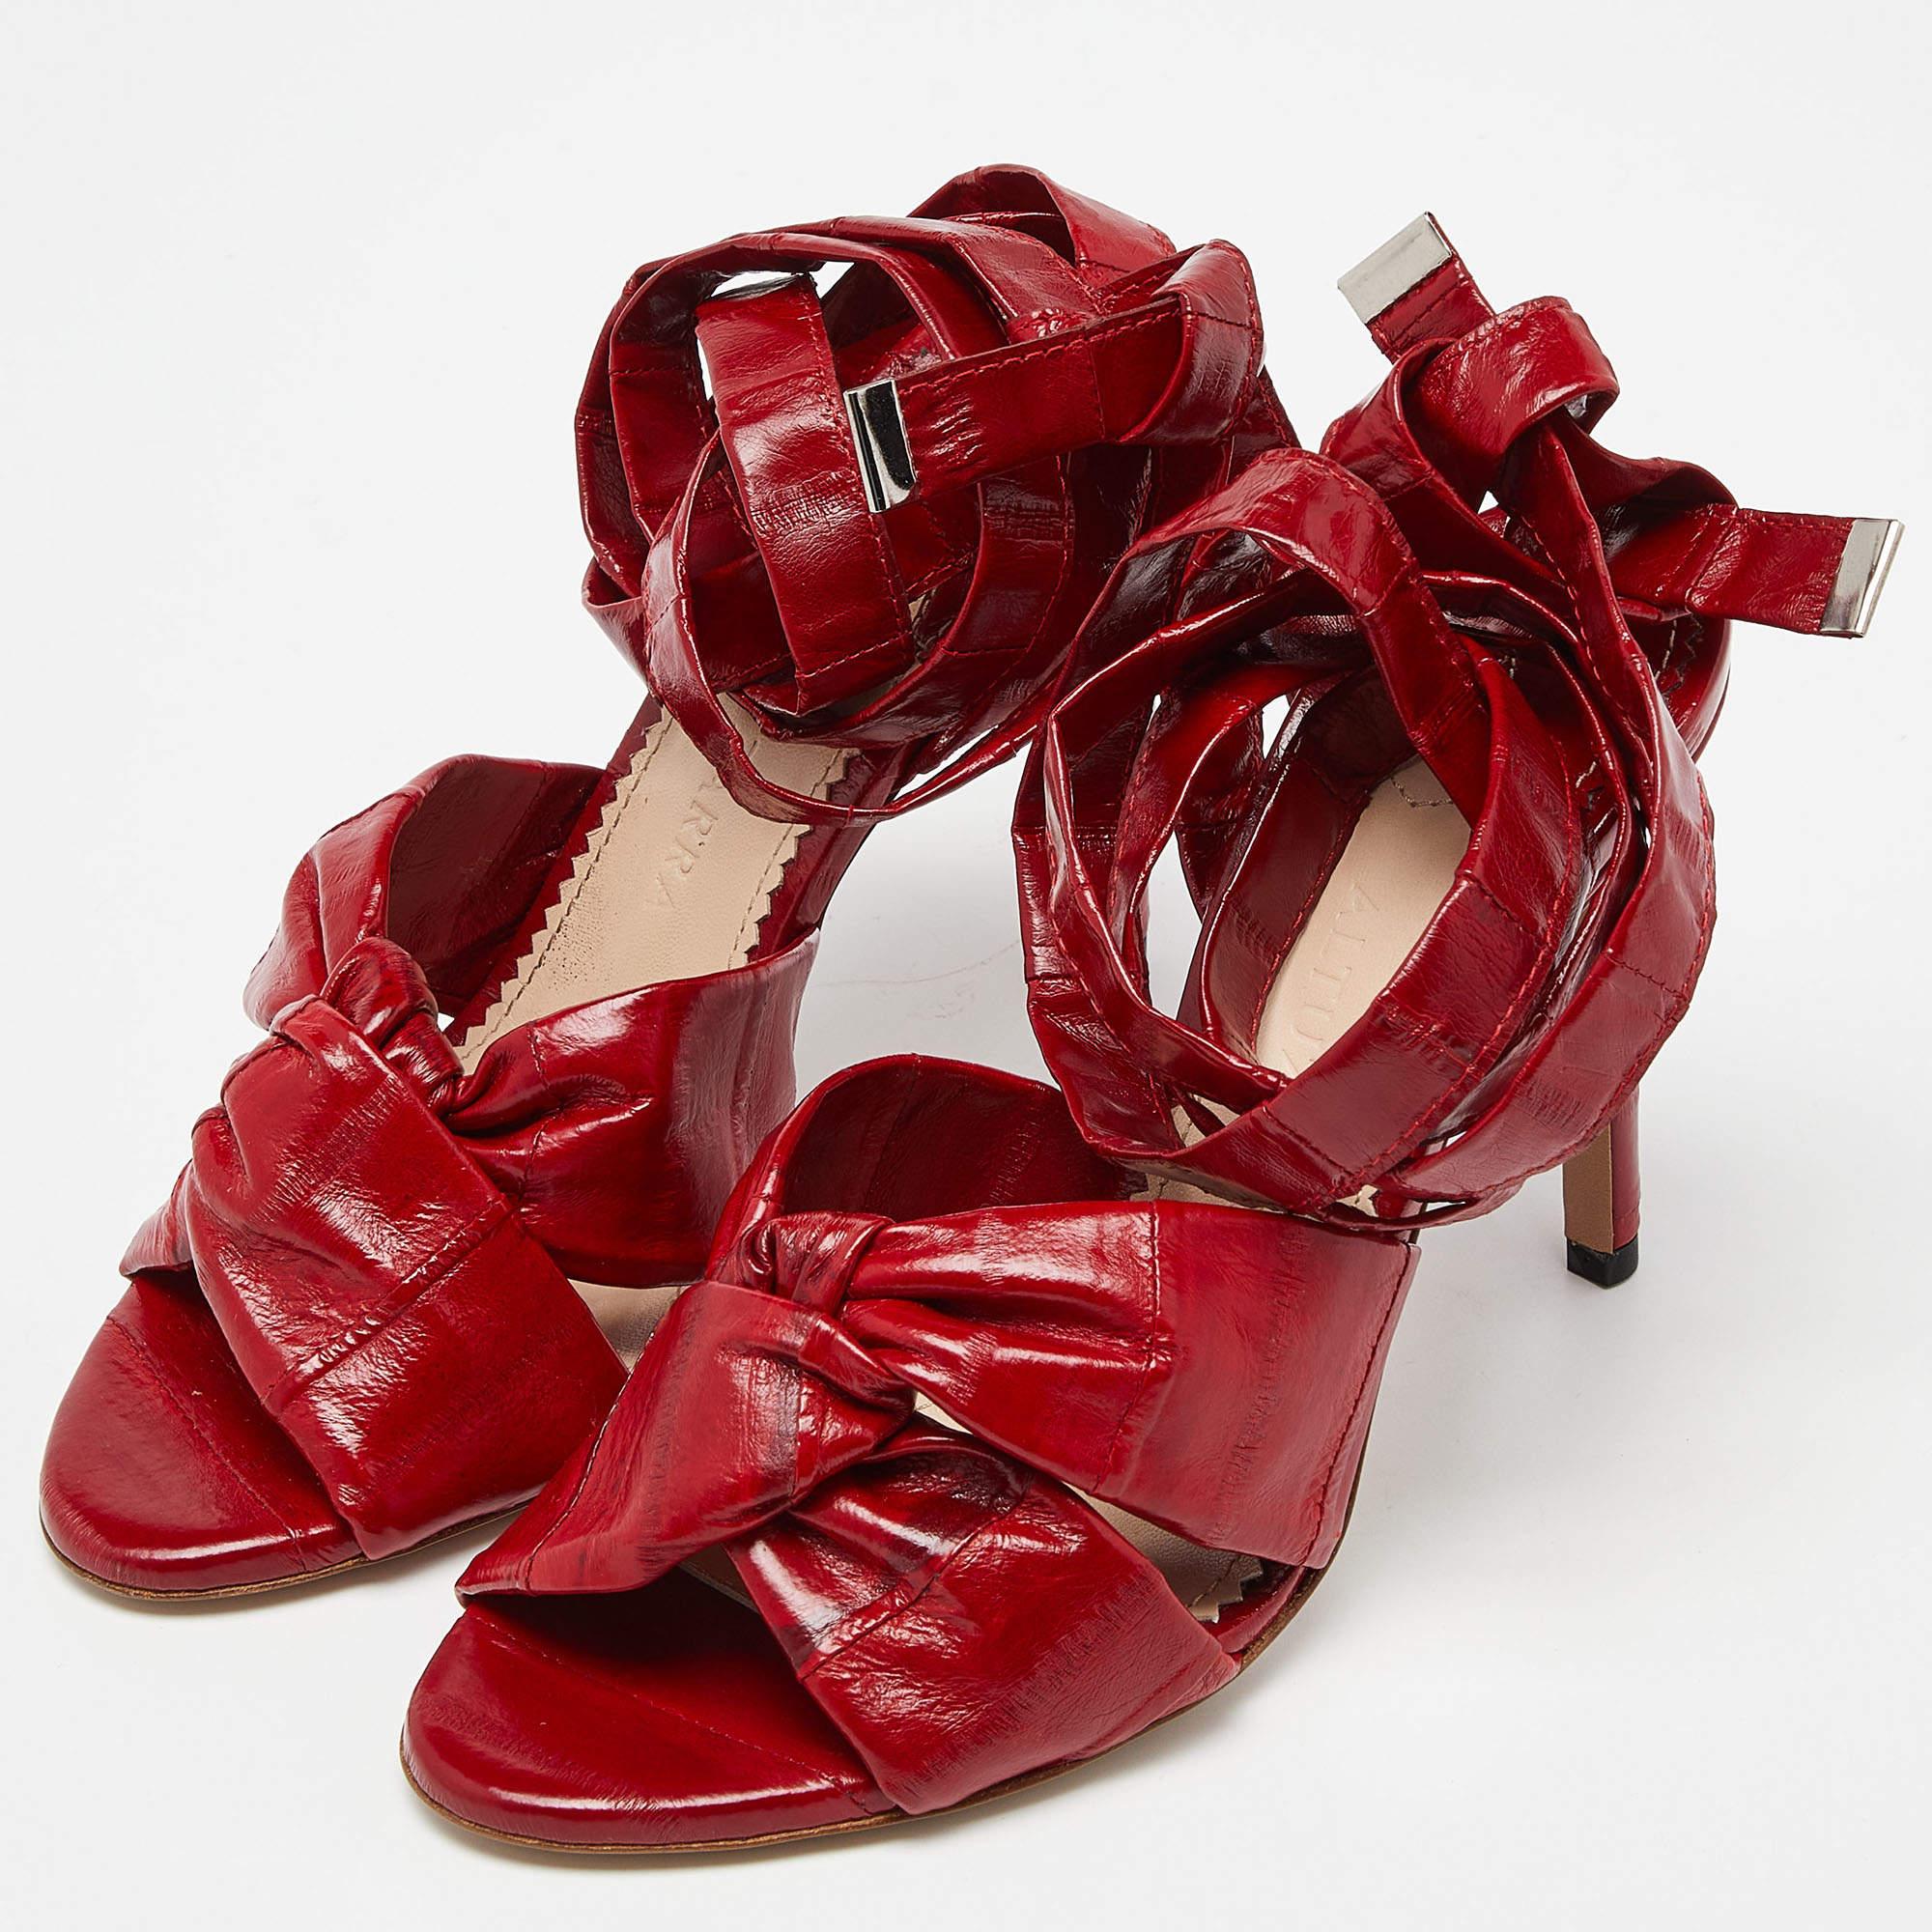 Altuzarra Red Eel Leather 'Zuni' Knotted Sandals Size 35 In New Condition For Sale In Dubai, Al Qouz 2